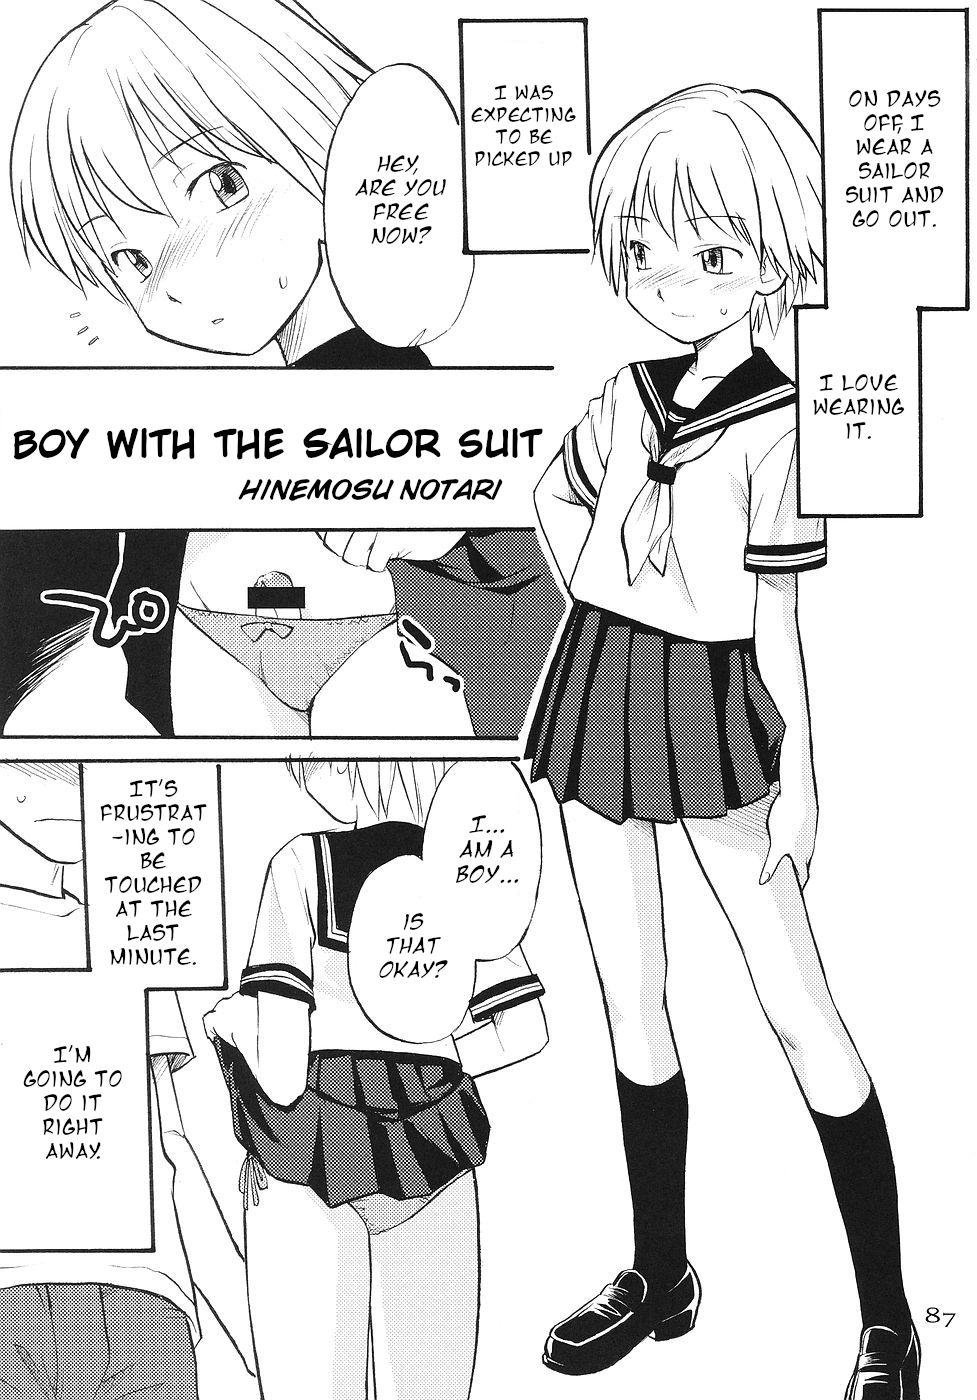 Boy with the Sailor Suit 1